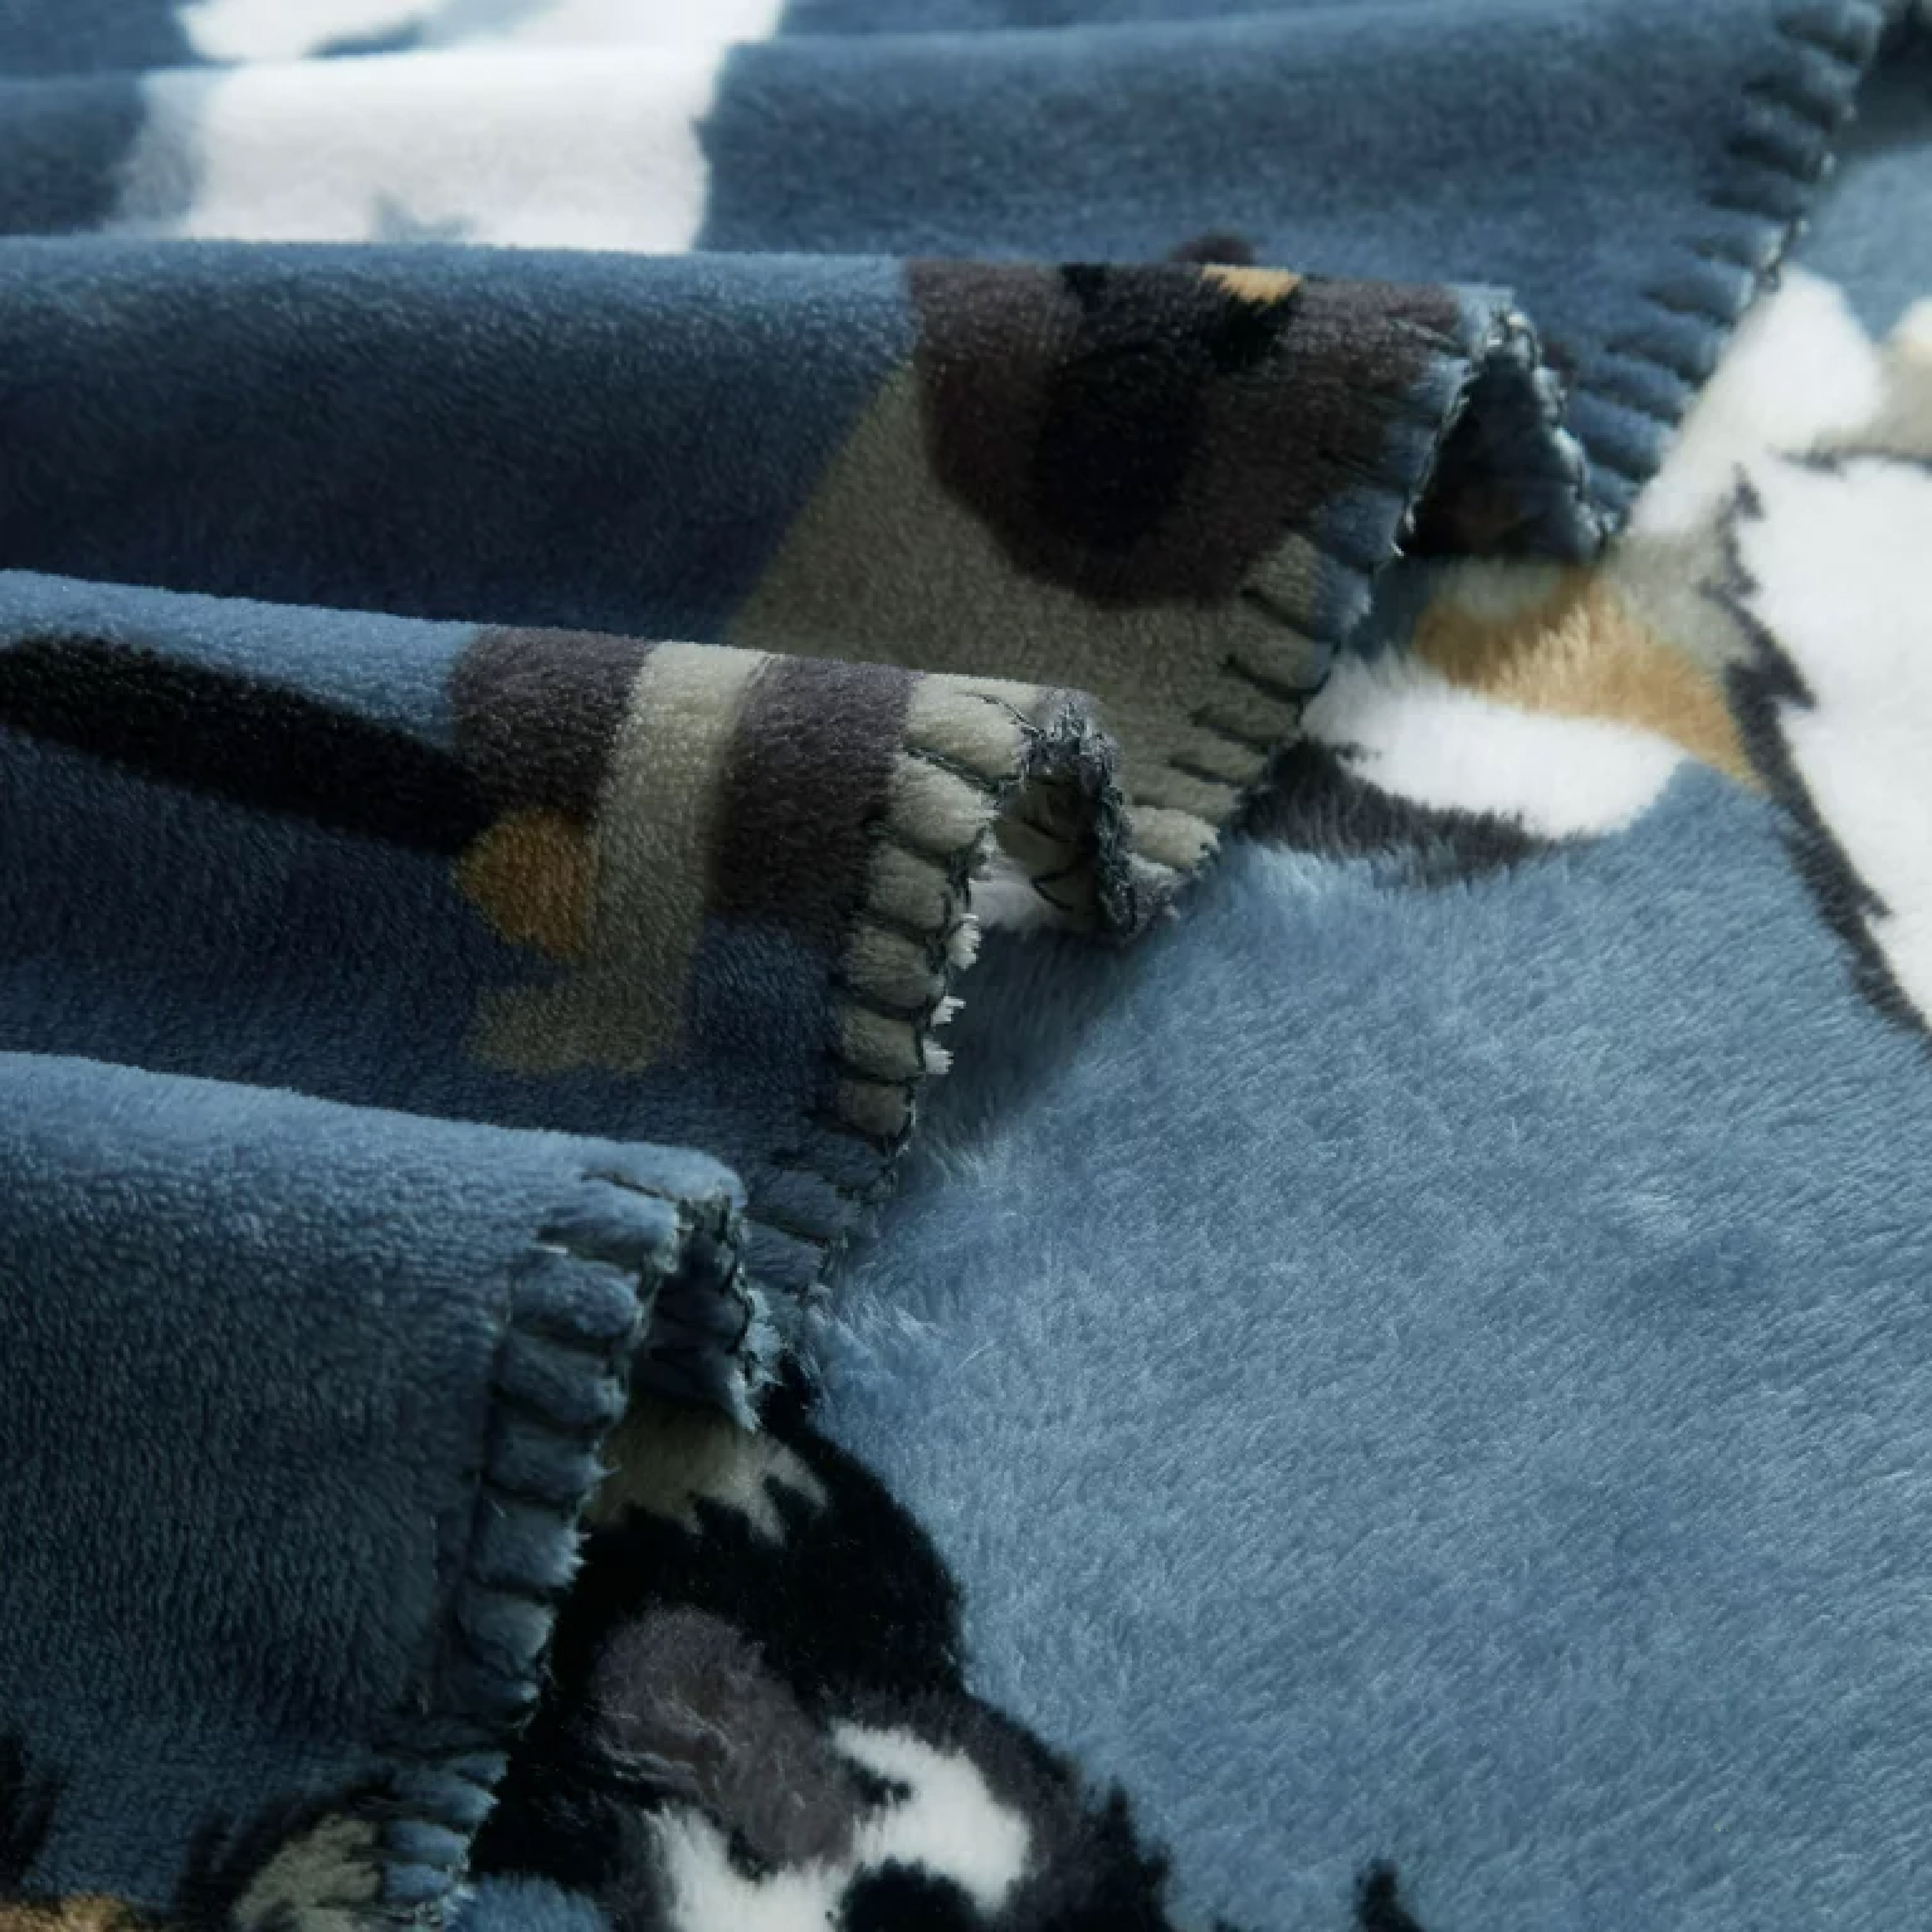 Mainstays Blue Dogs Plush Throw Blanket 50" x 60" - image 3 of 6